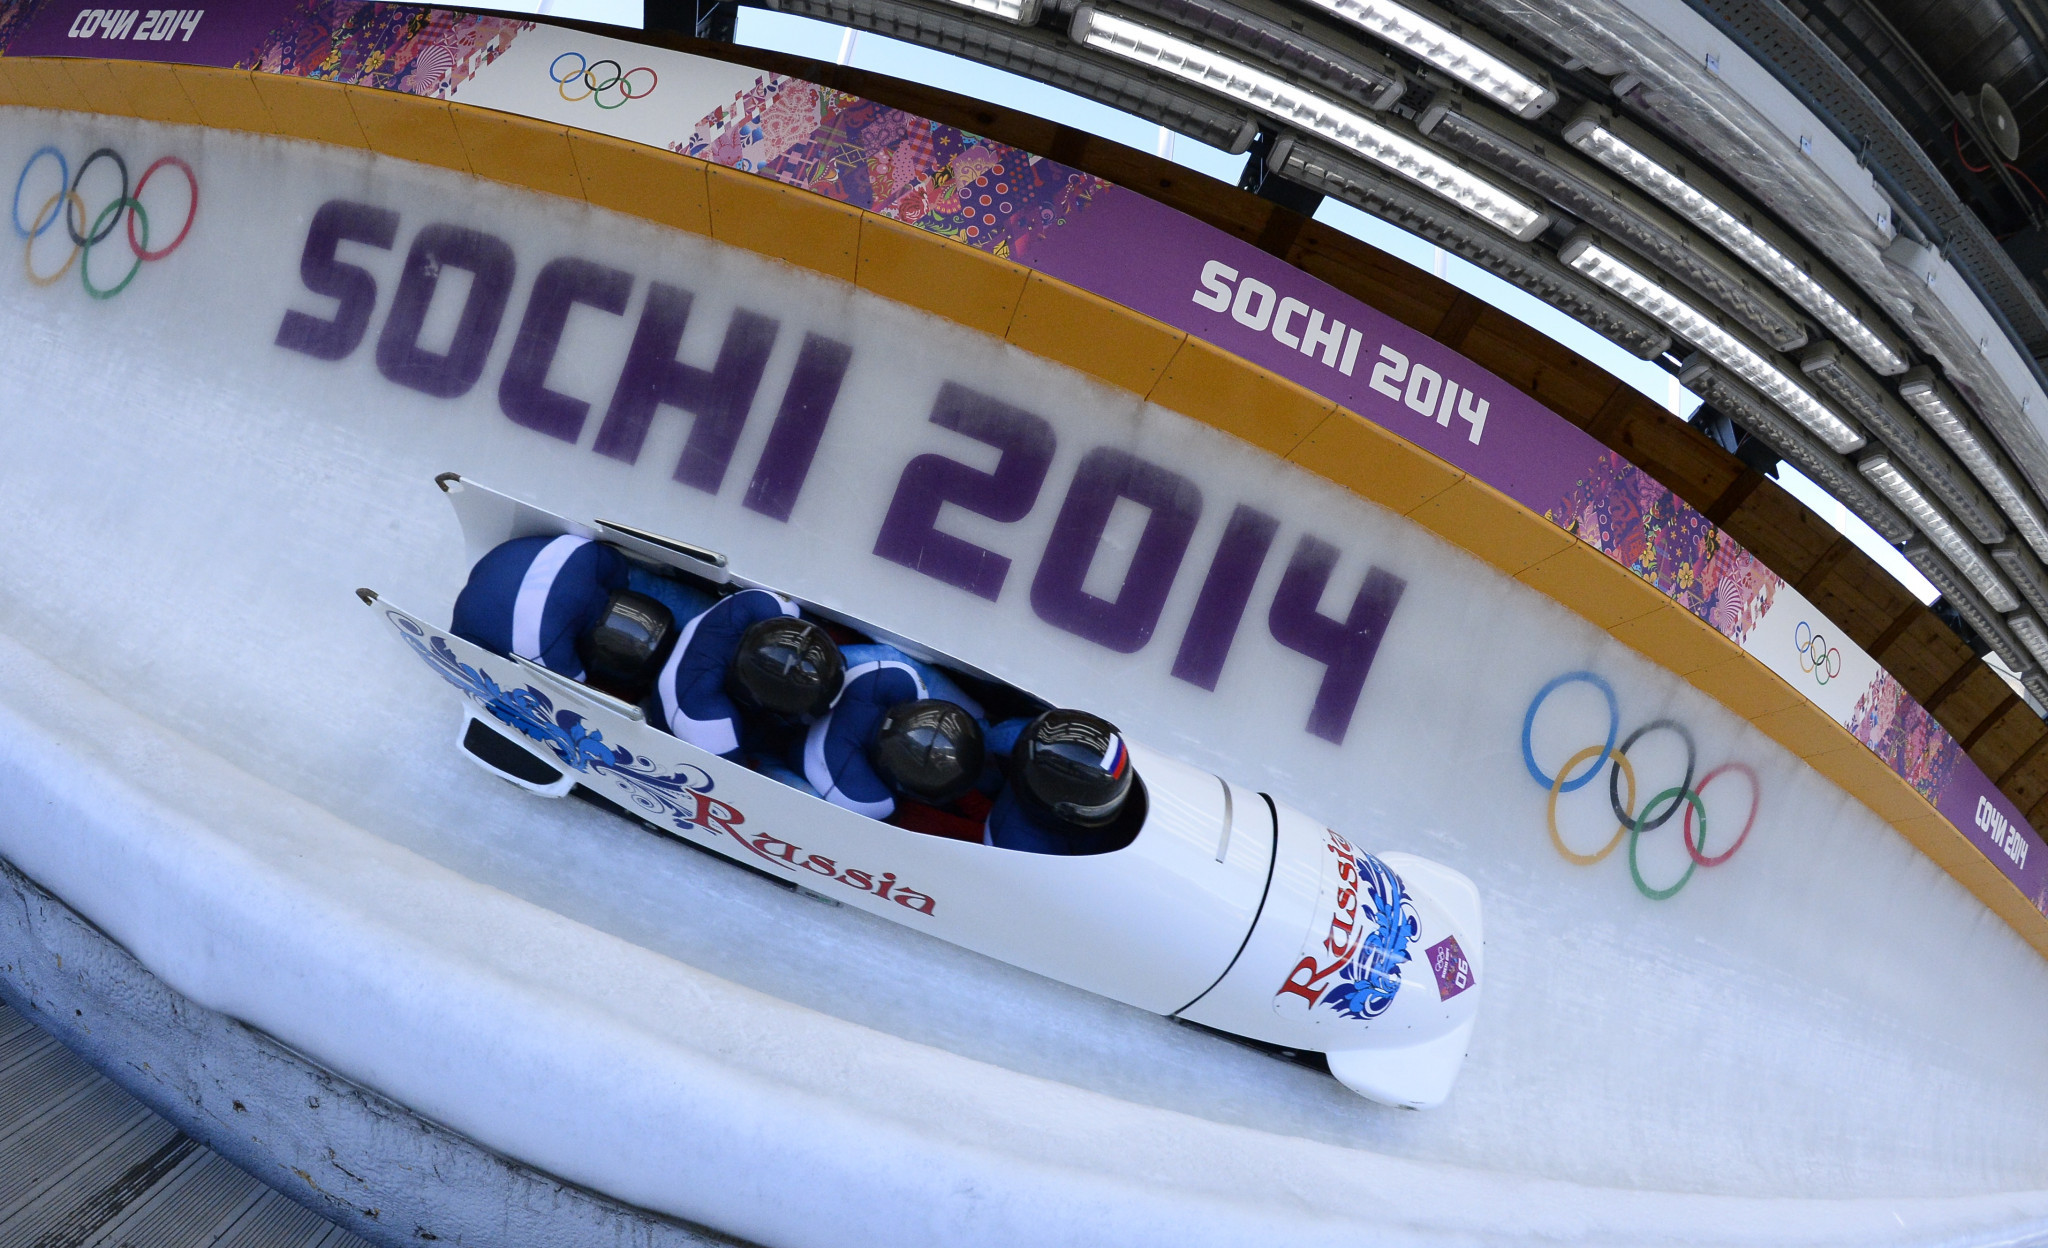 Russian bobsleigh athletes plan return to competition when doping bans conclude next month